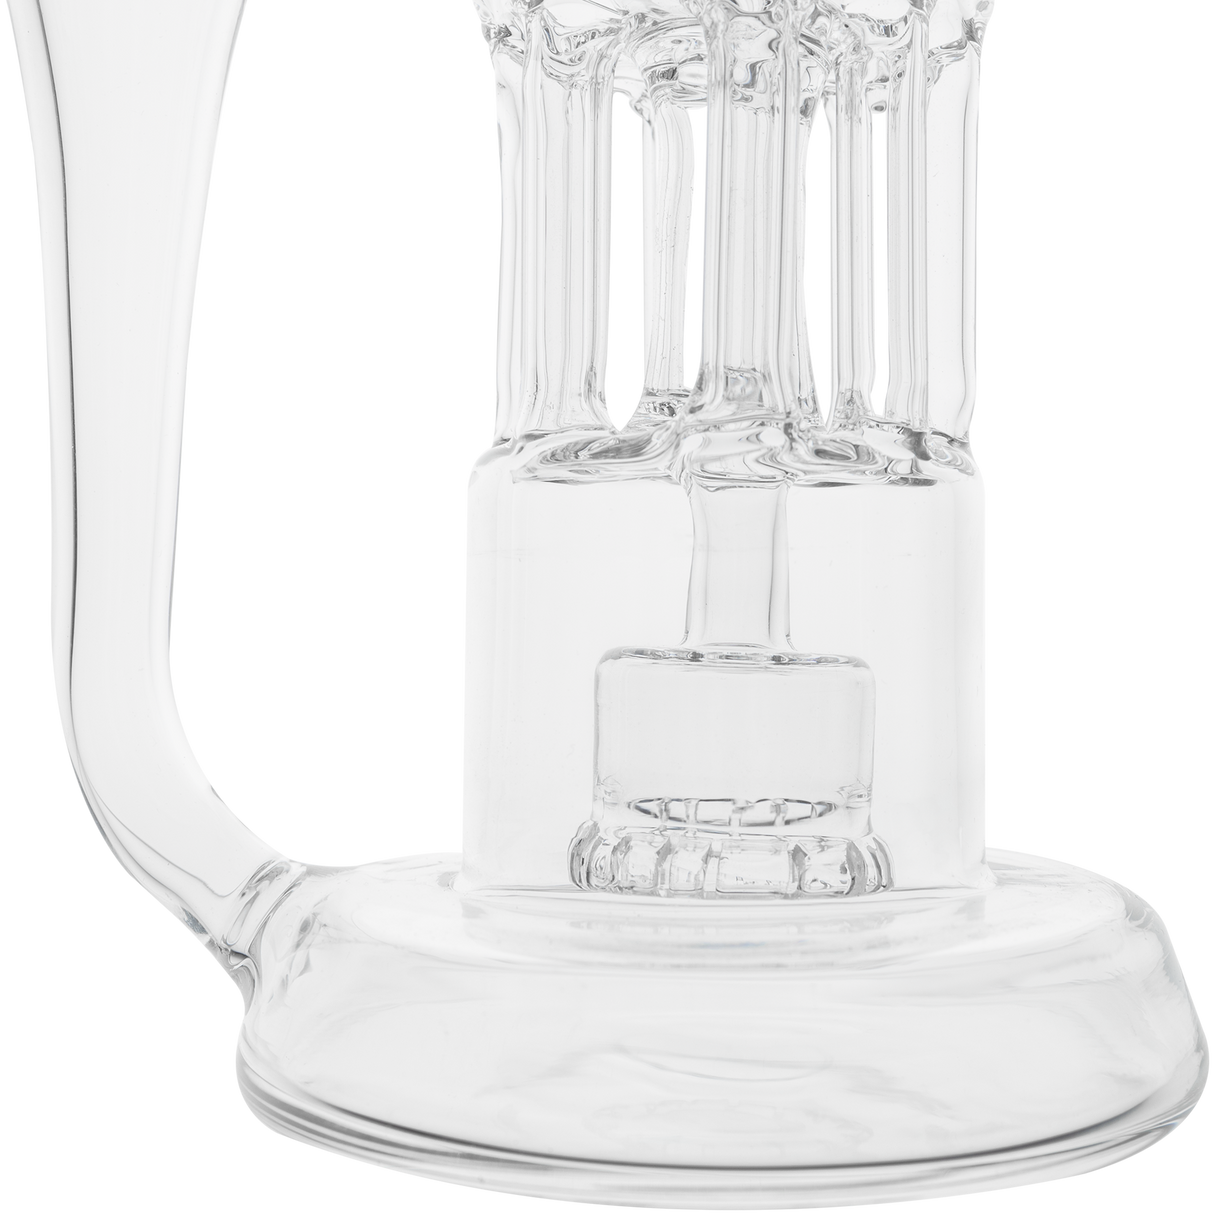 Cookies Flowcycler Dab Rig featuring Borosilicate Glass and Recycler Percolator - Close-up